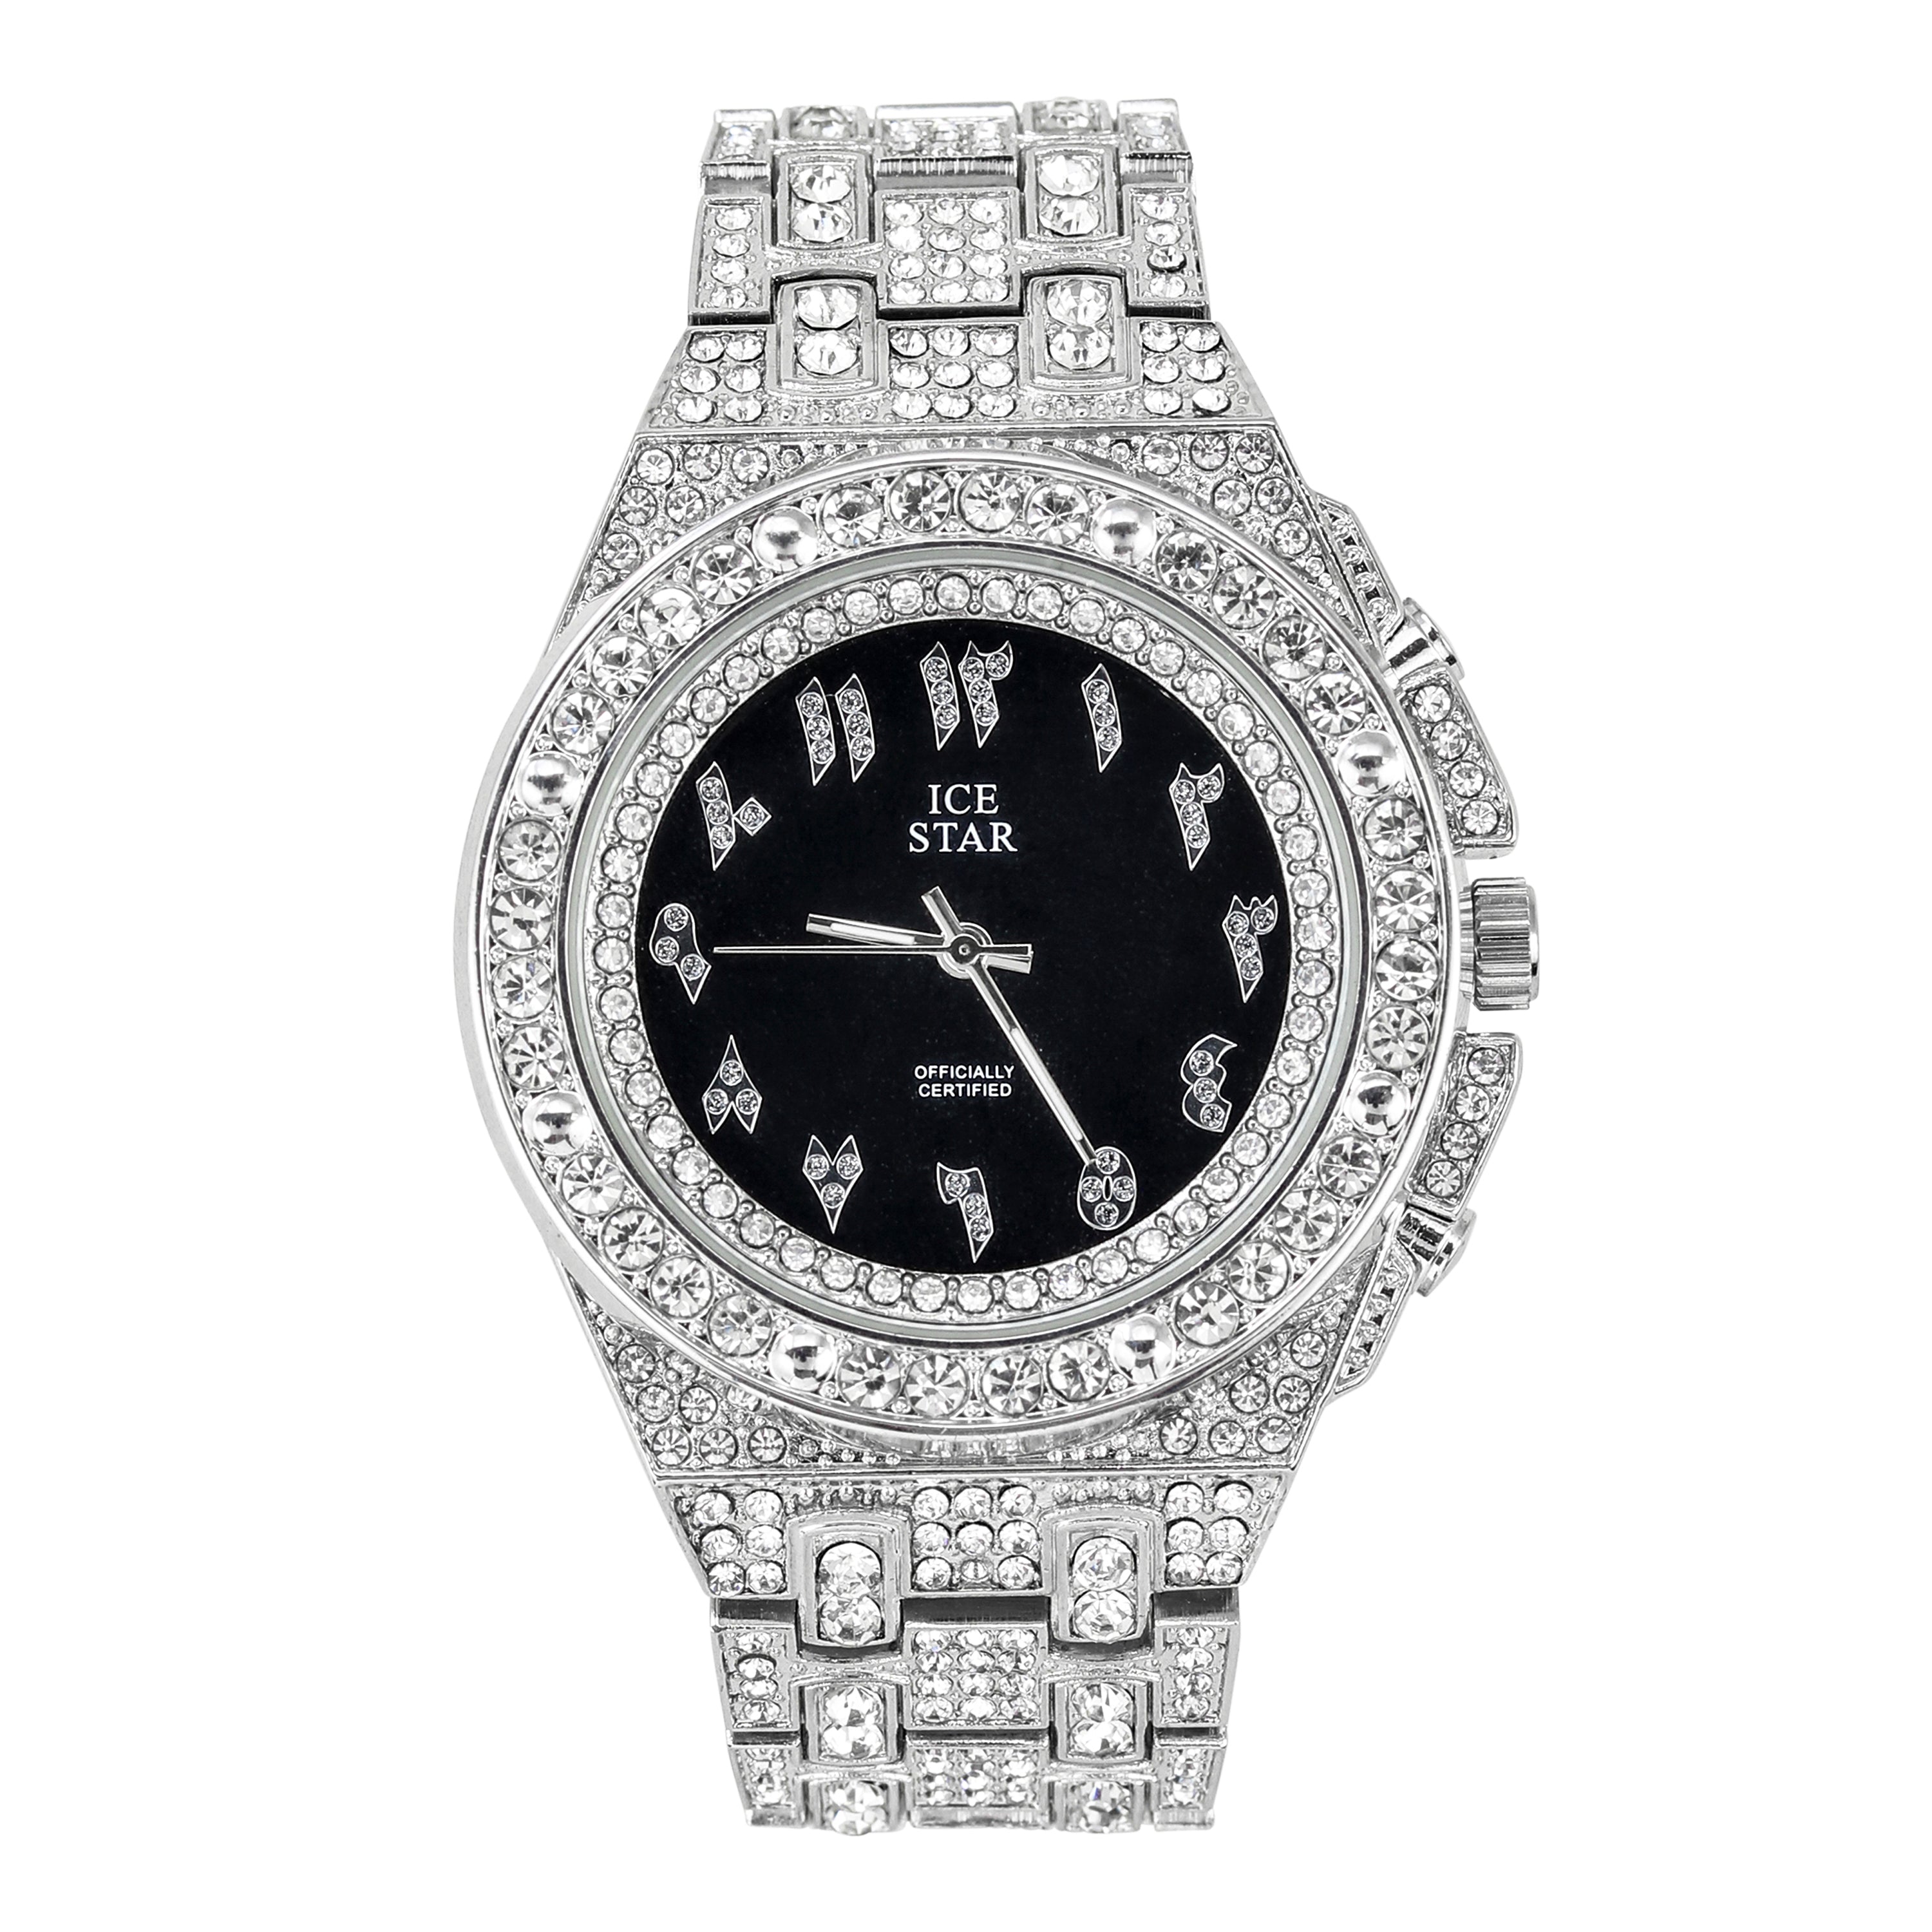 Men's Round Iced Out Watch 45mm Silver - Arabic Dial